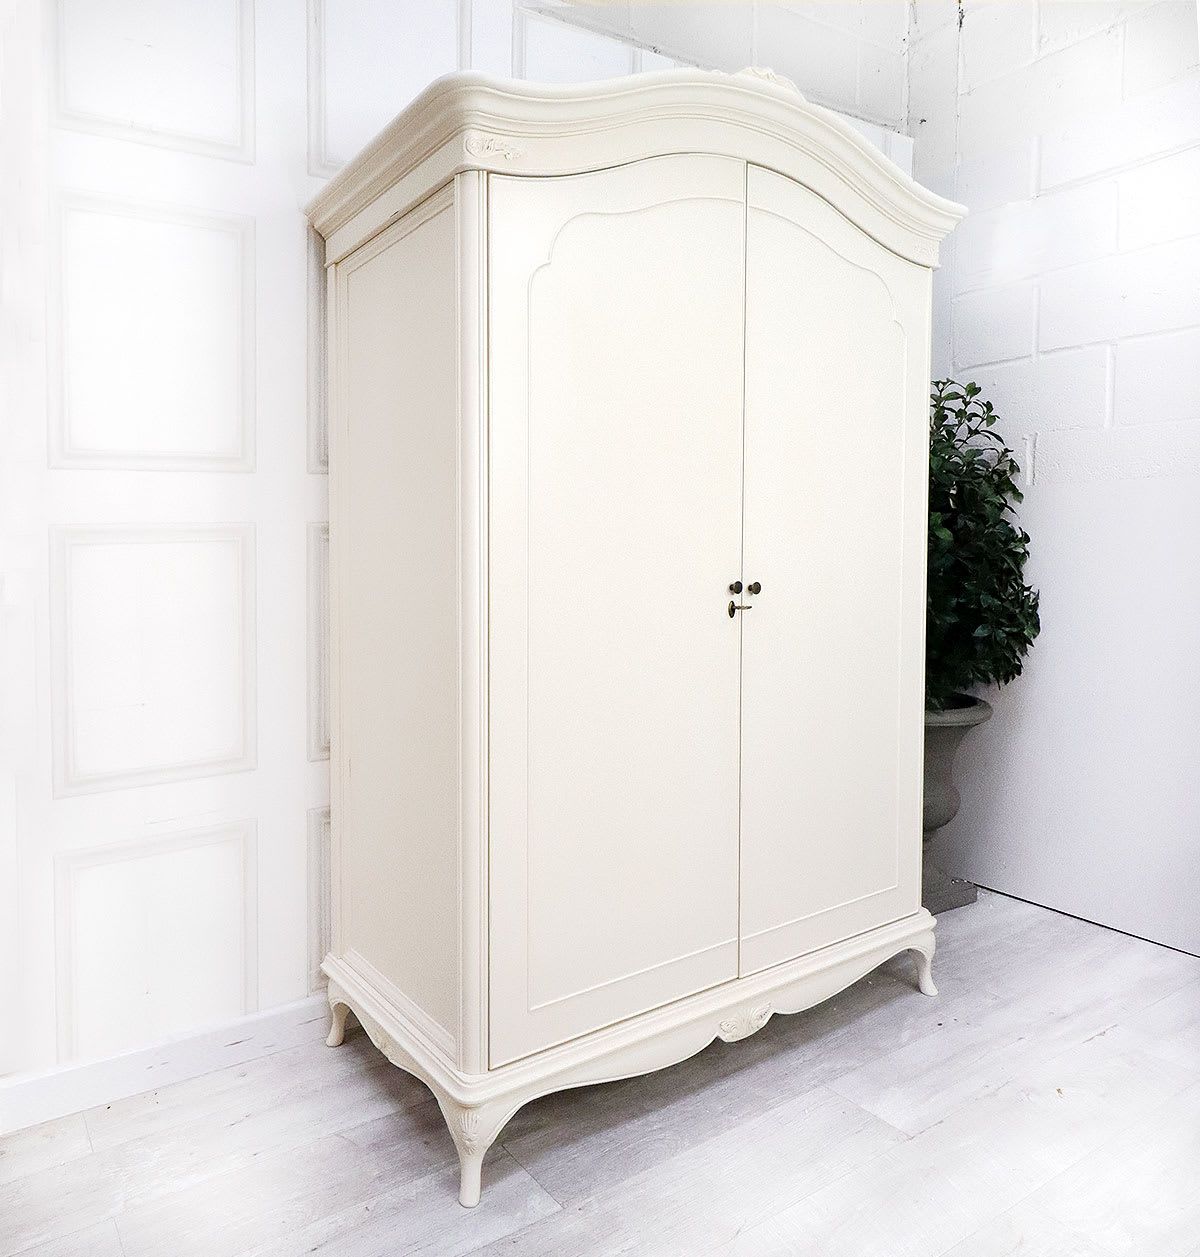 Willis & Gambier French Style Ivory Large Armoire Wardrobe | Nicky Cornell  A Uk Stockist Intended For French Style Wardrobes (View 3 of 20)